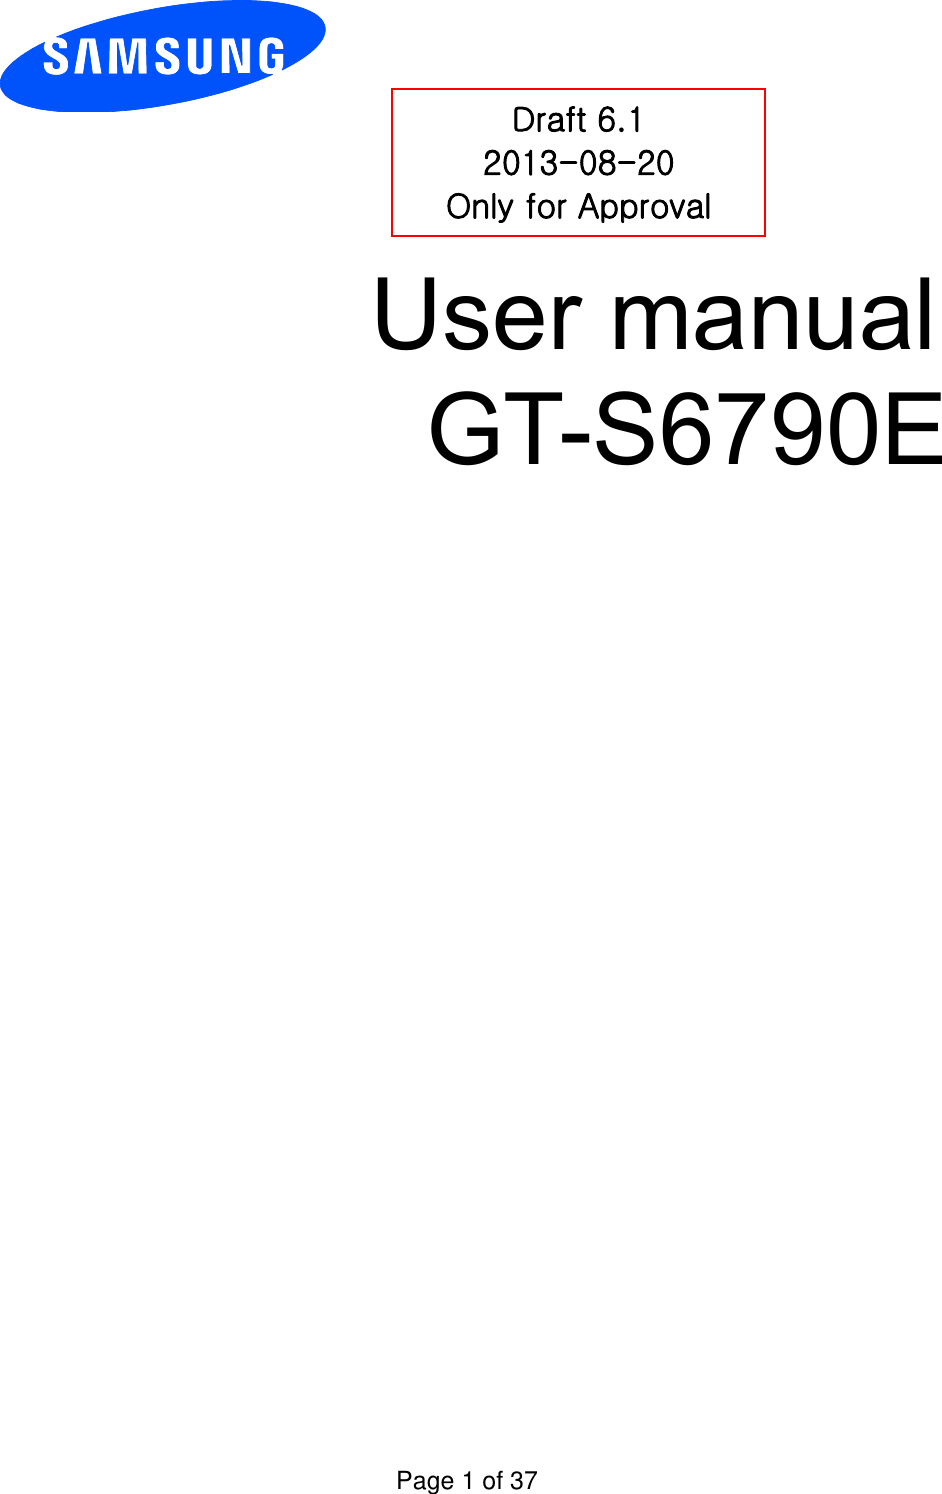          User manual GT-S6790E           Draft 6.1 2013-08-20 Only for Approval Page 1 of 37